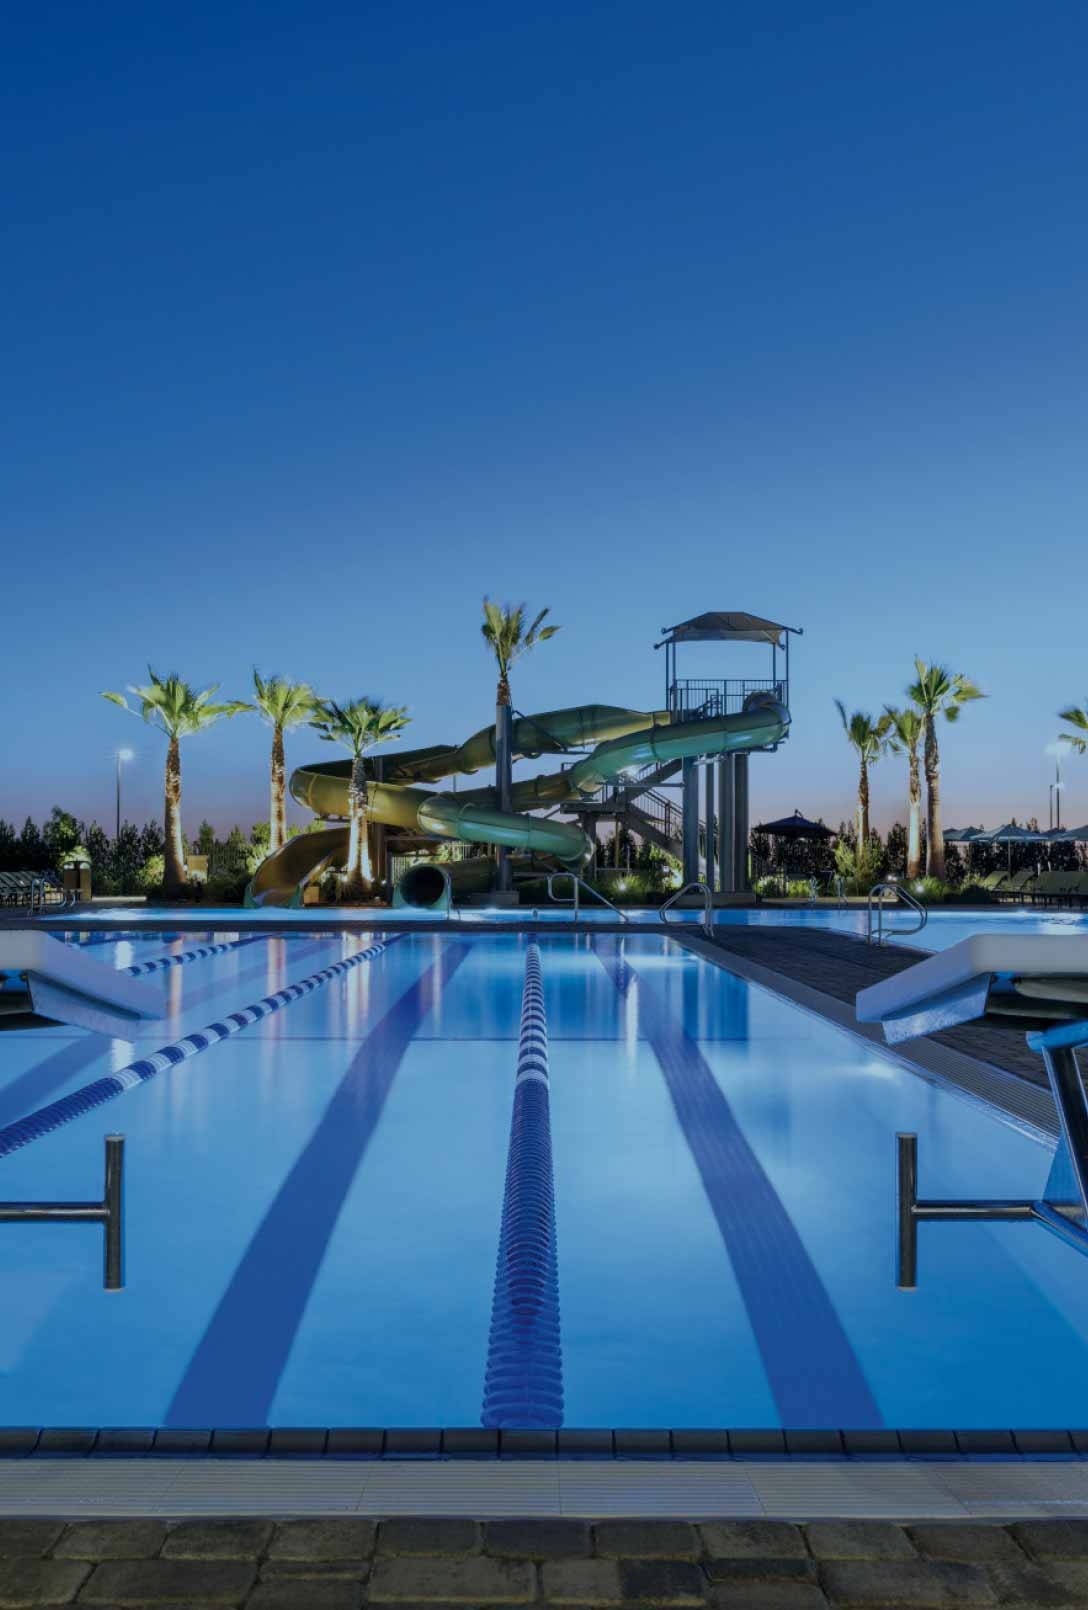 An outdoor lap pool featuring starting blocks at dusk, with waterslides in the background